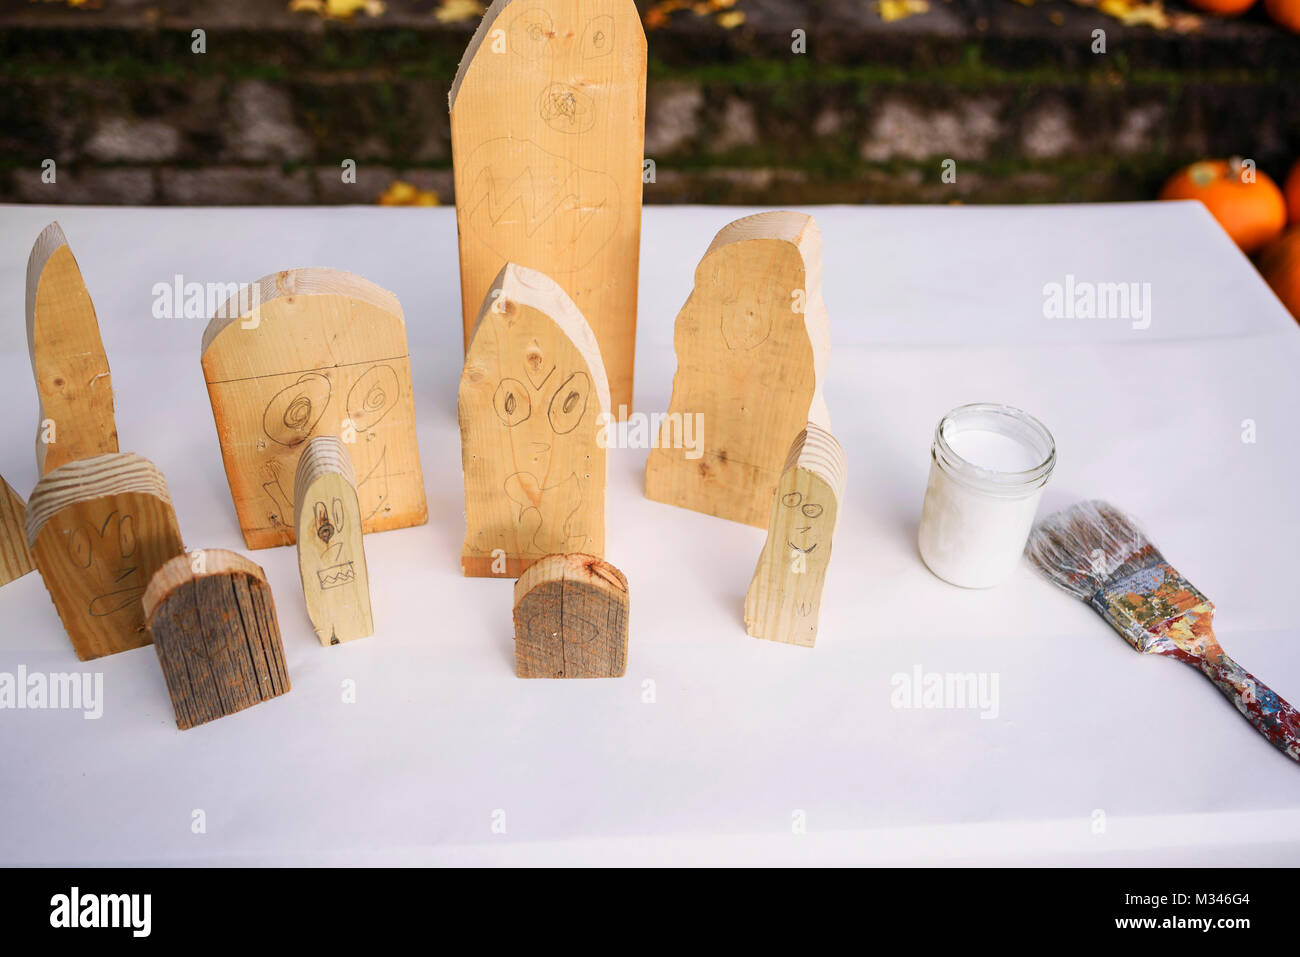 Wooden Ghost decorations for Halloween on a table with white paint Stock Photo